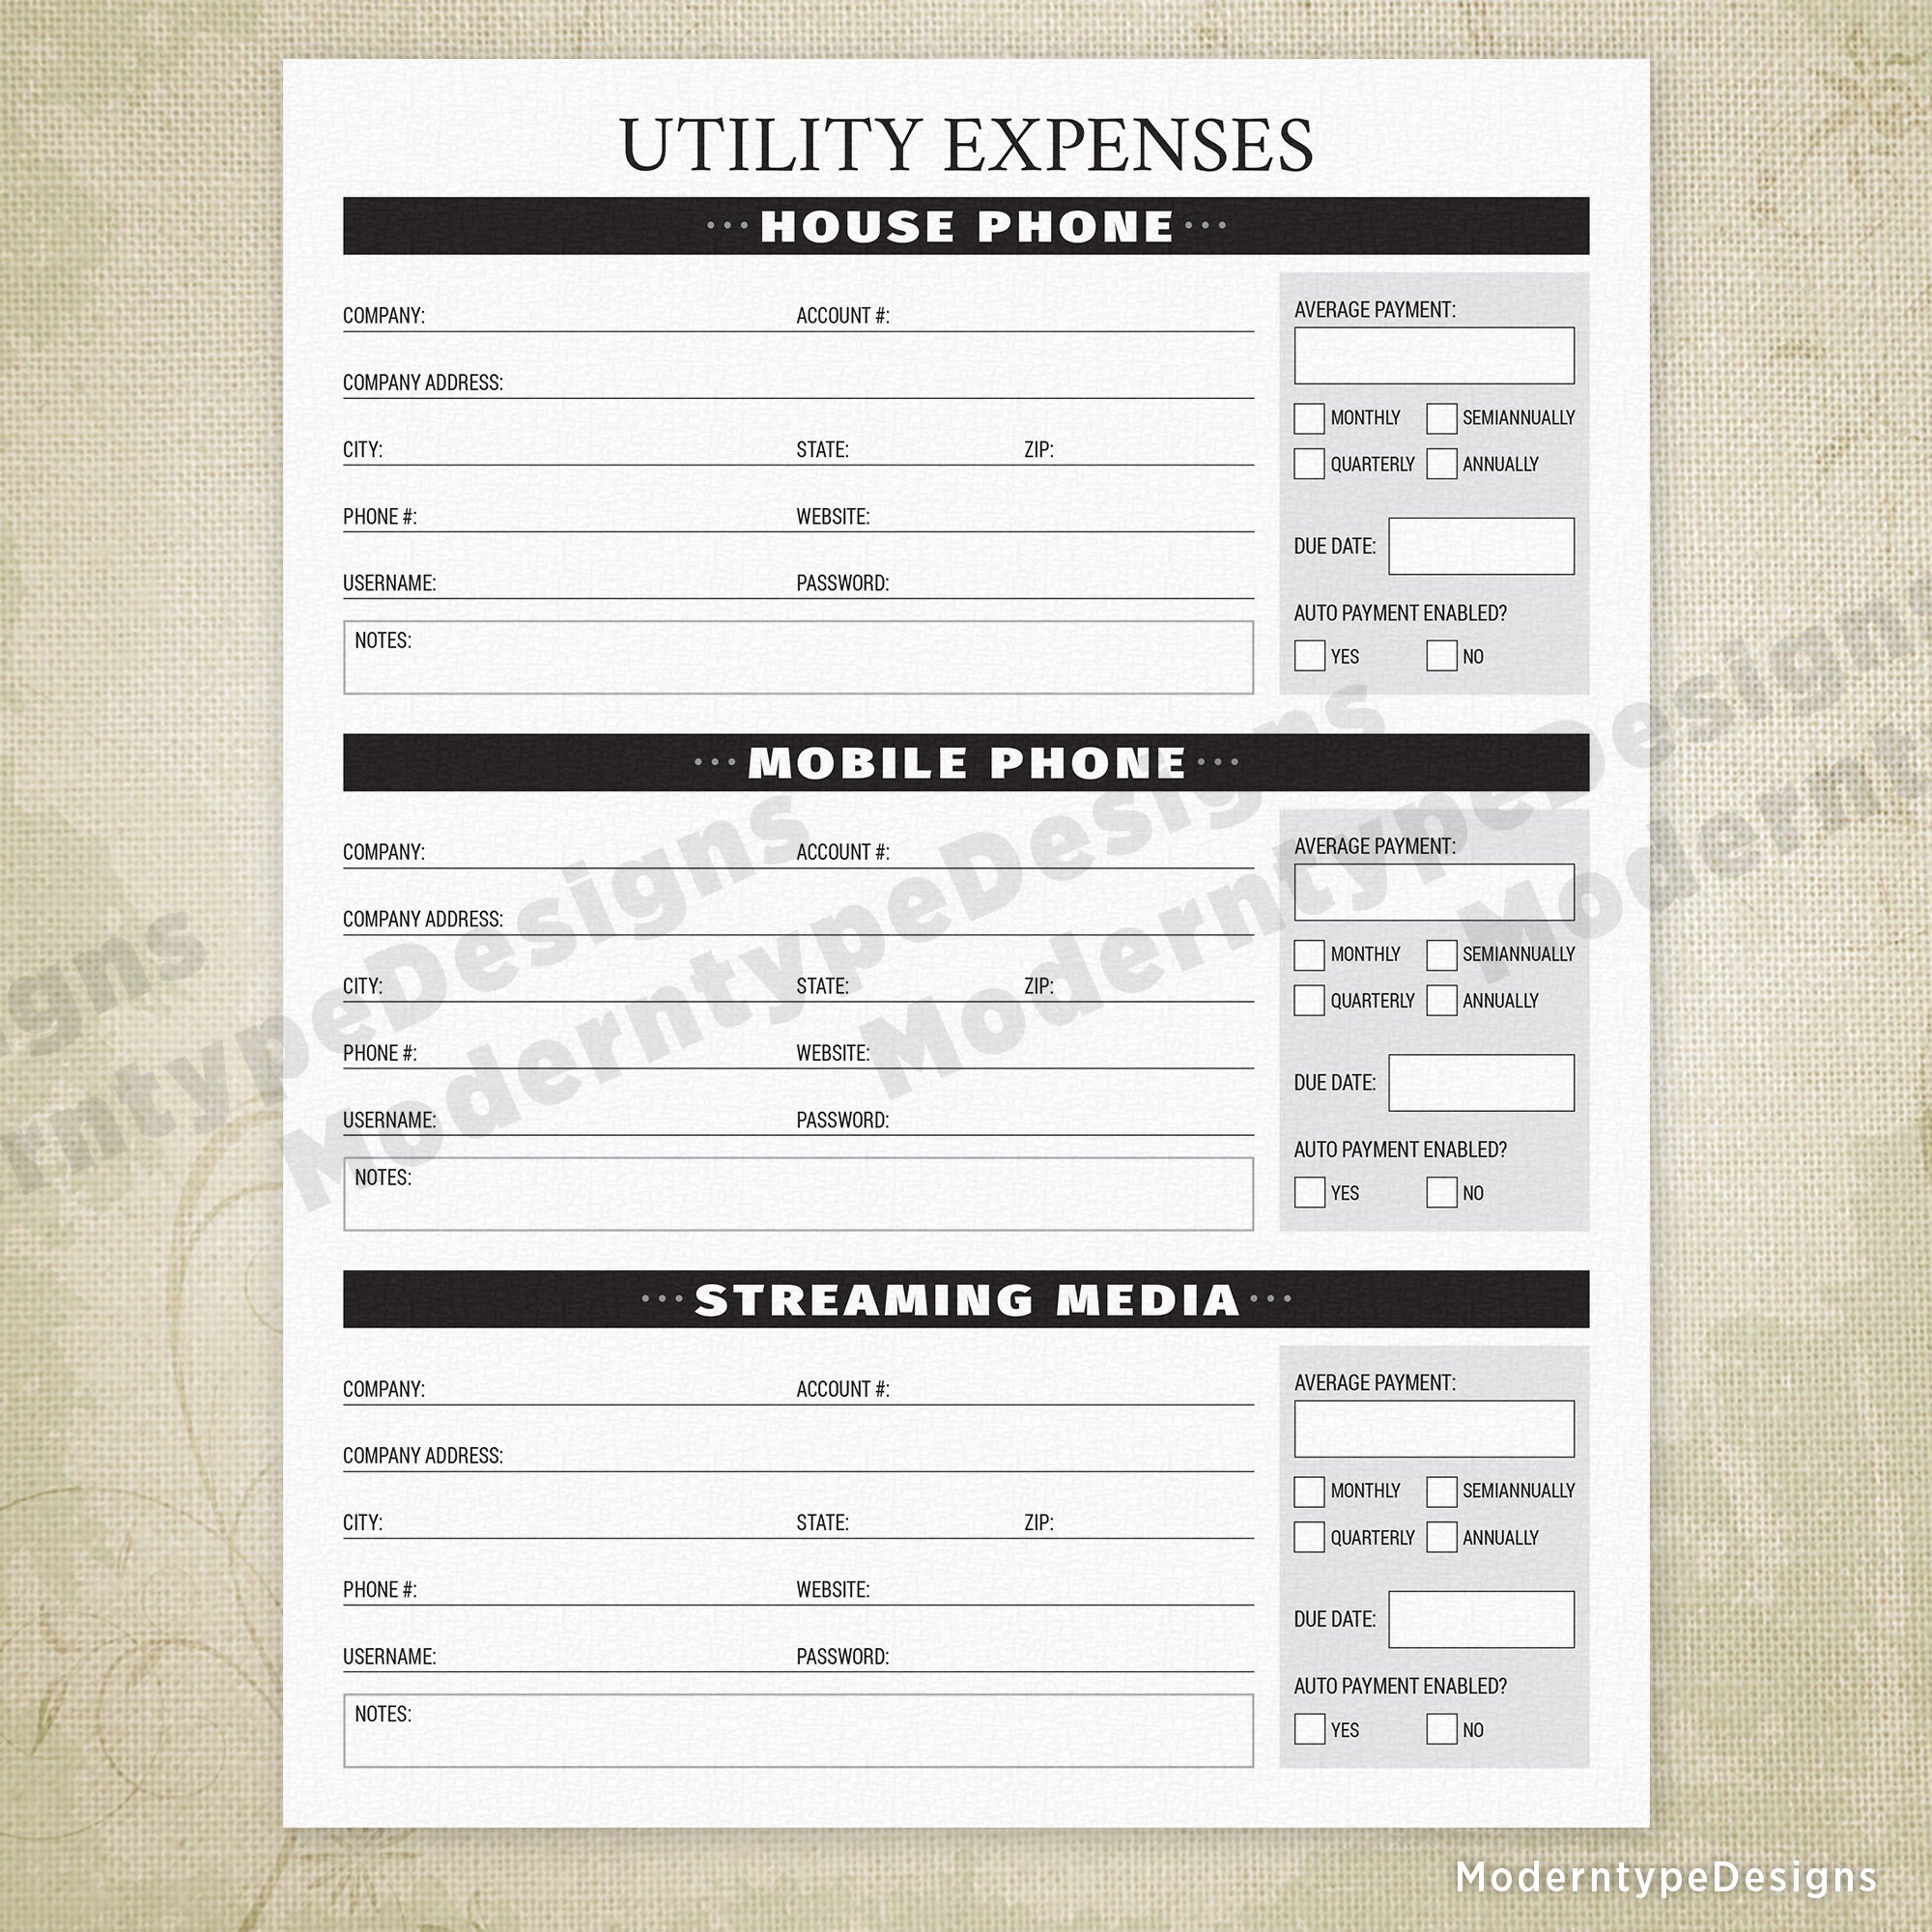 Utility Expenses Printable - End of Life